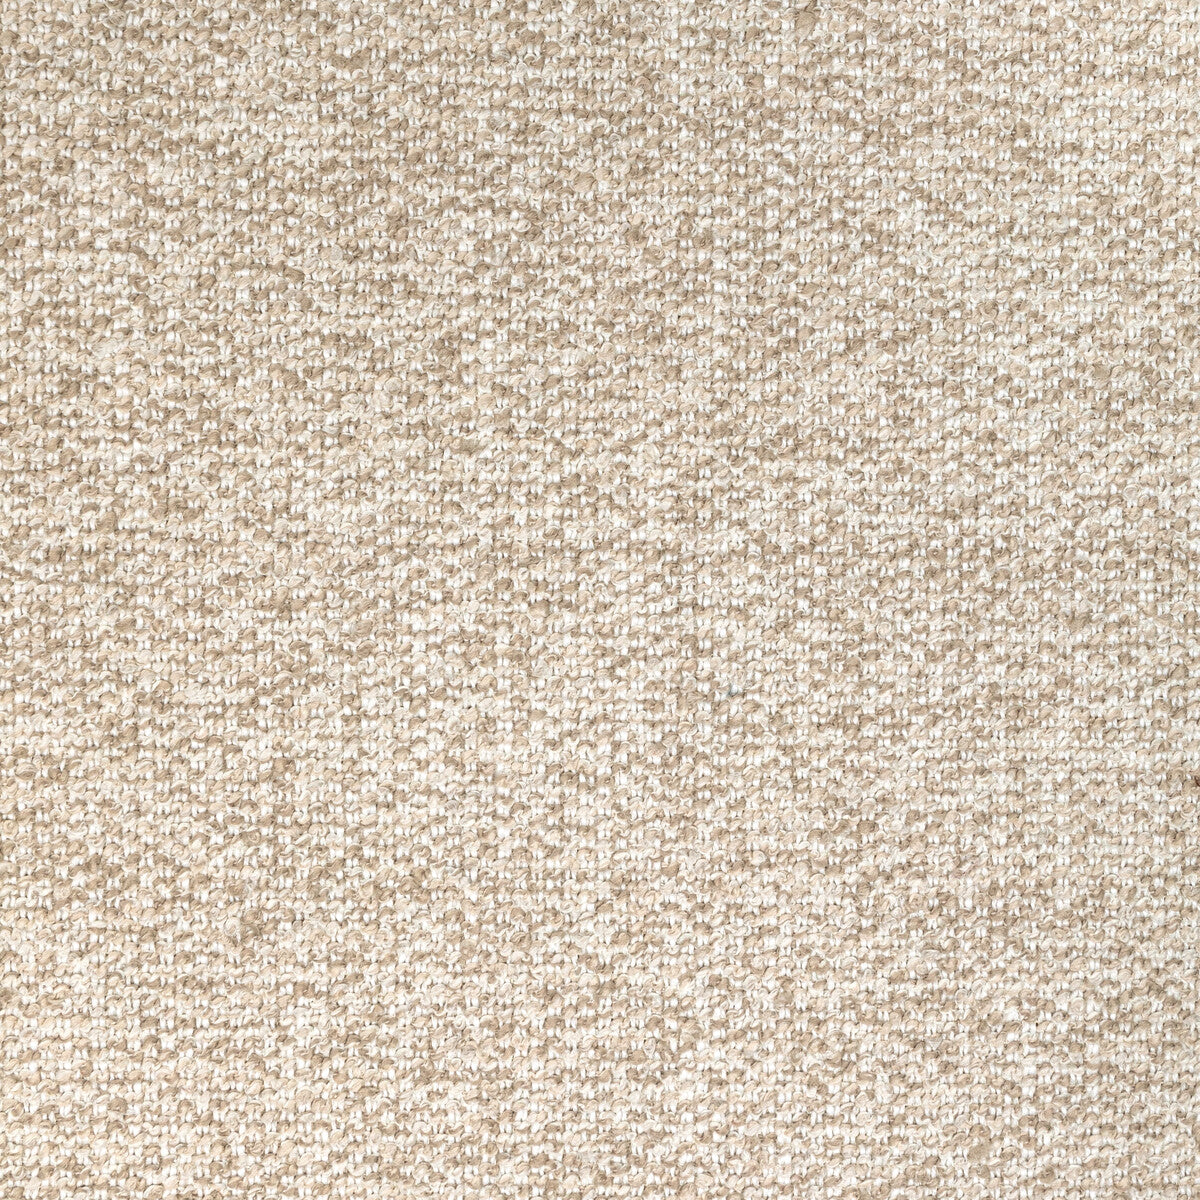 Mathis fabric in oatmeal color - pattern 36699.1116.0 - by Kravet Contract in the Refined Textures Performance Crypton collection